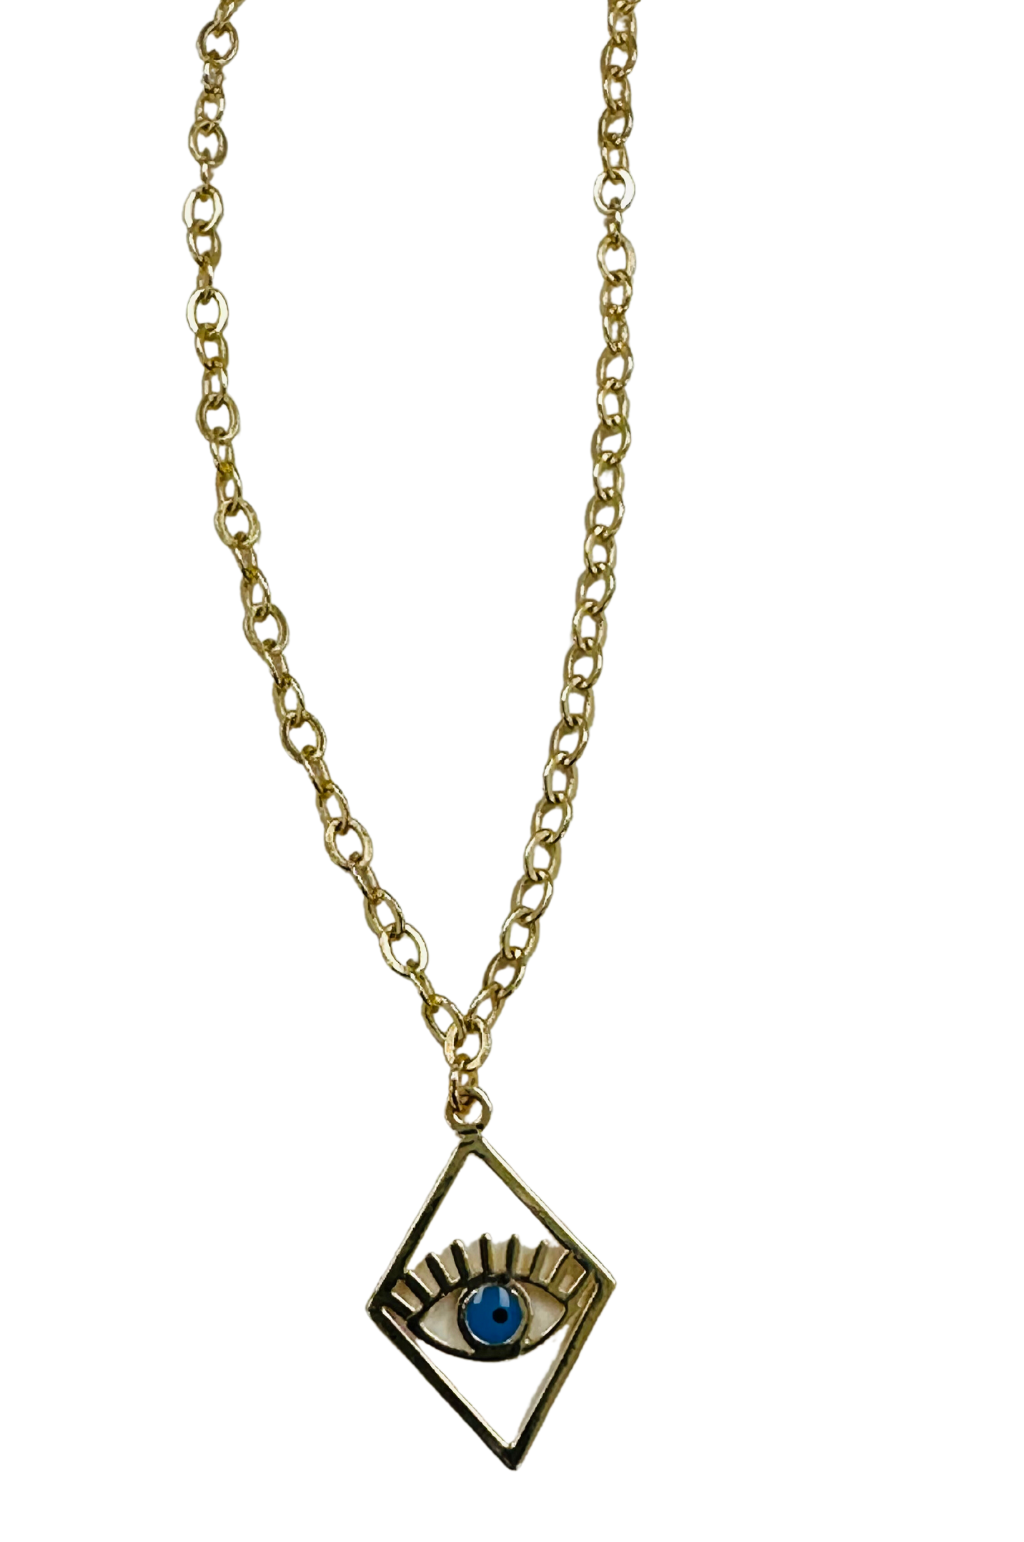 The Gold Chain Evil Eye Necklace by Annie Claire Designs - SoSis